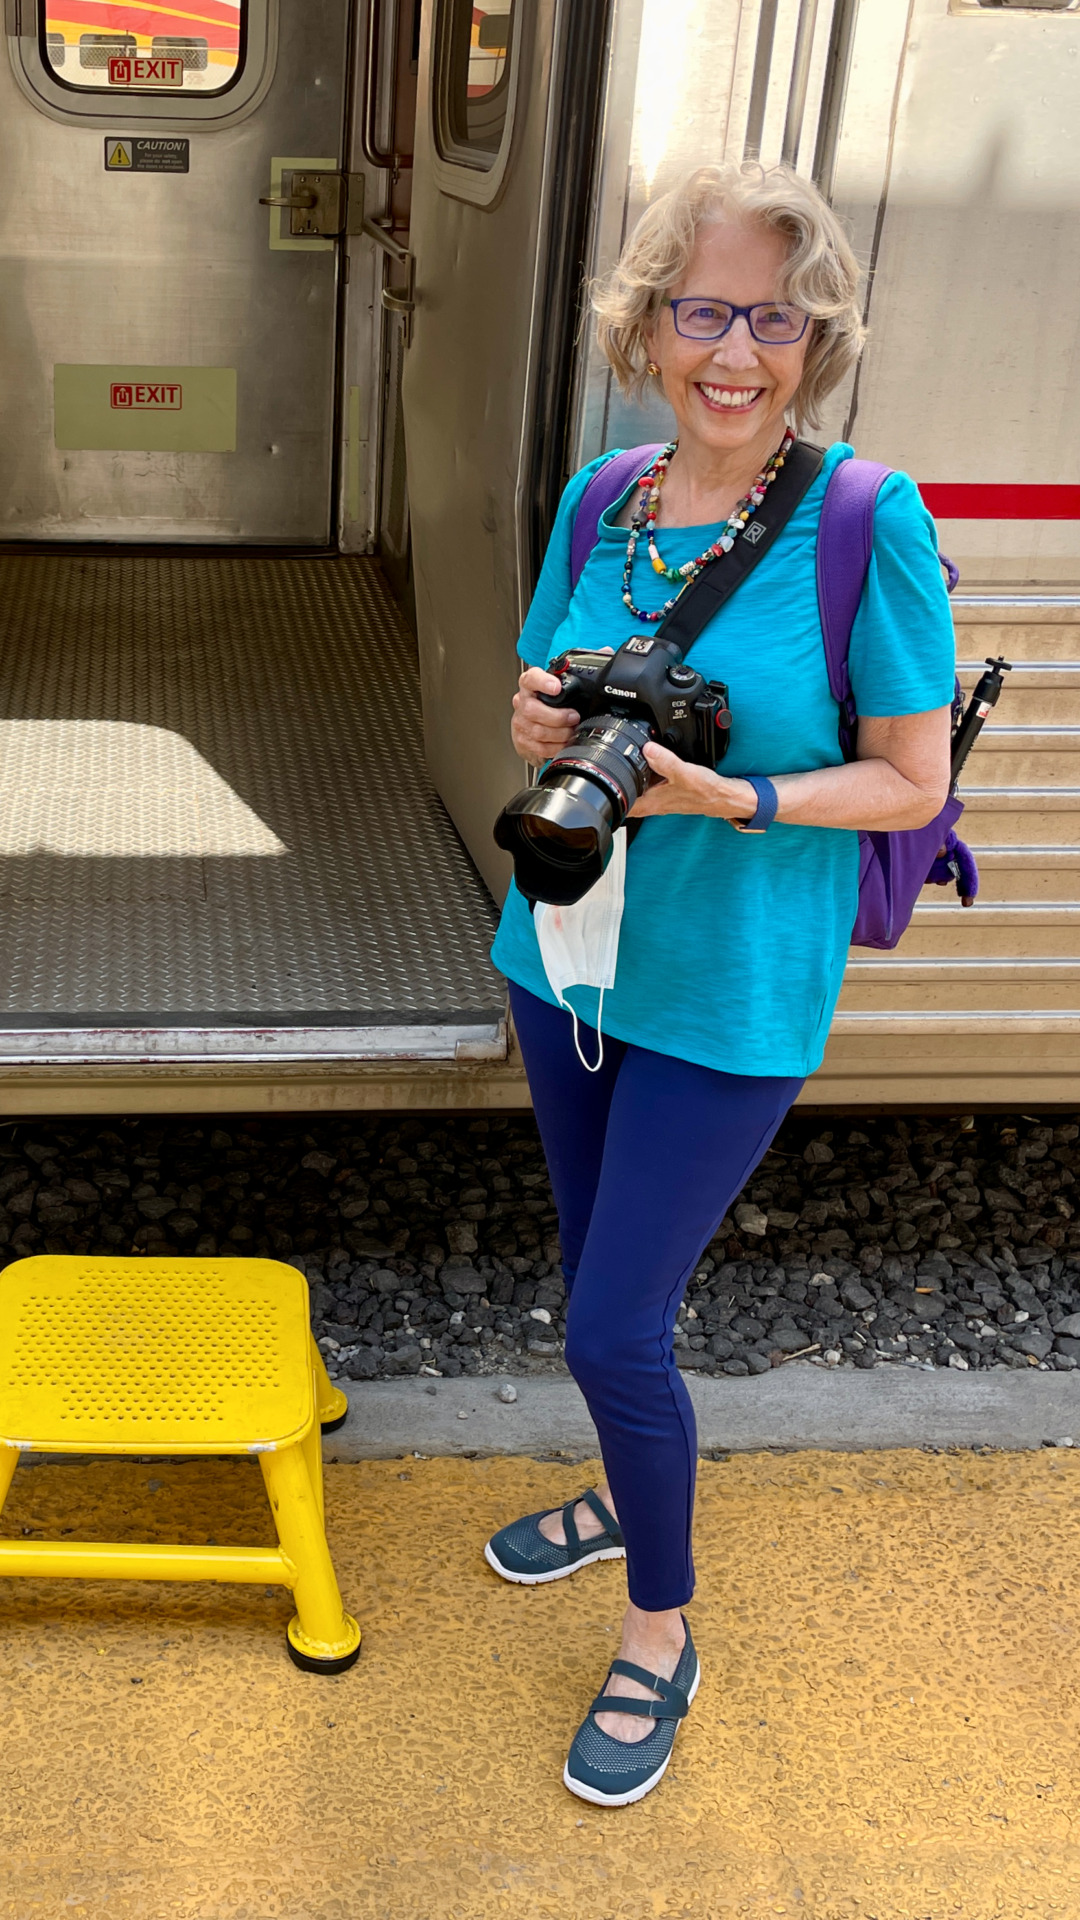 Woman standing in front of Amtrak Sleeper Car with camera in her hand and wearing a small backpack.